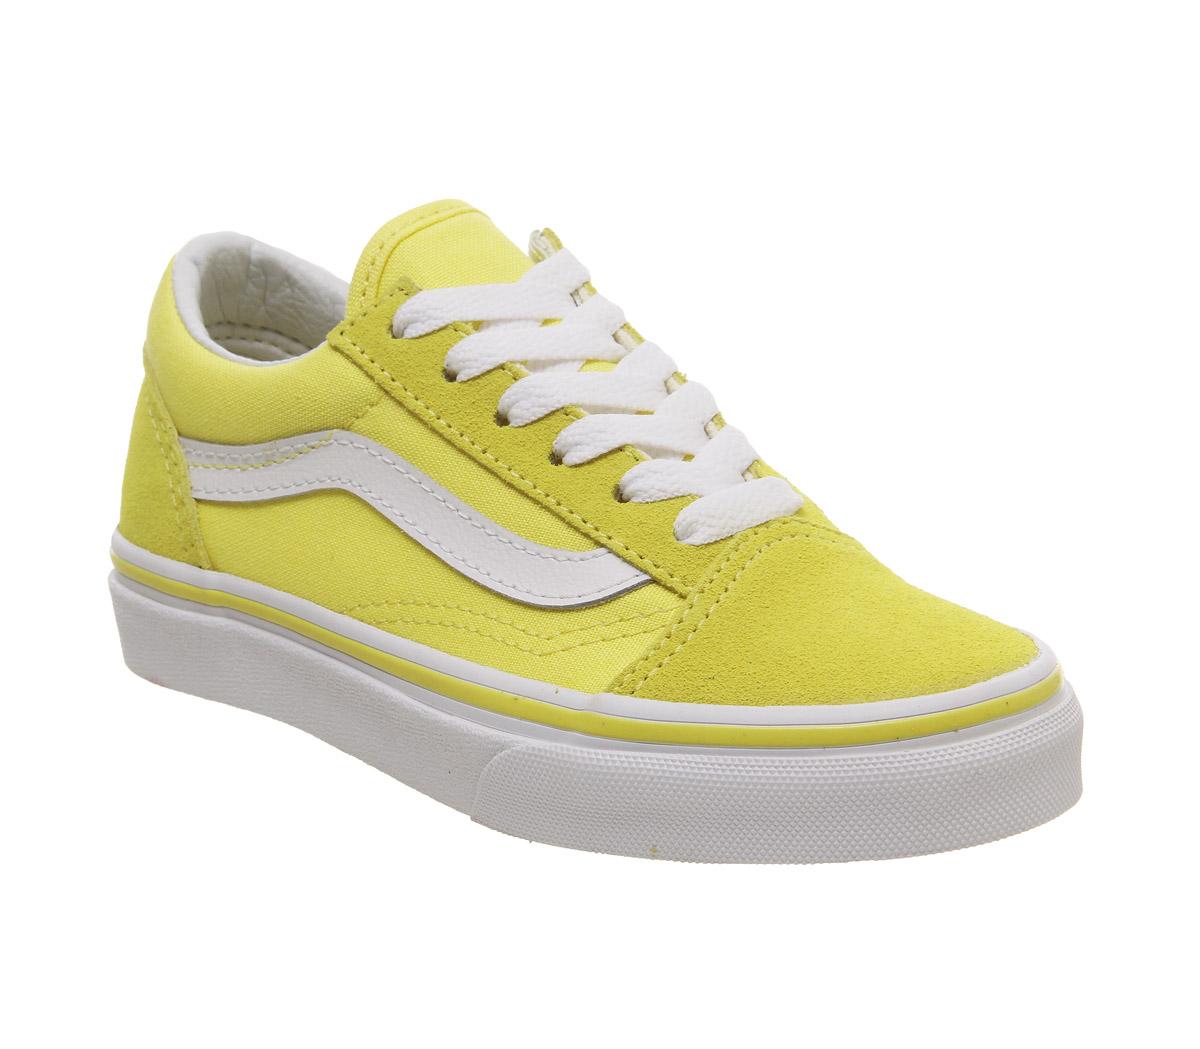 vans old skool with yellow laces